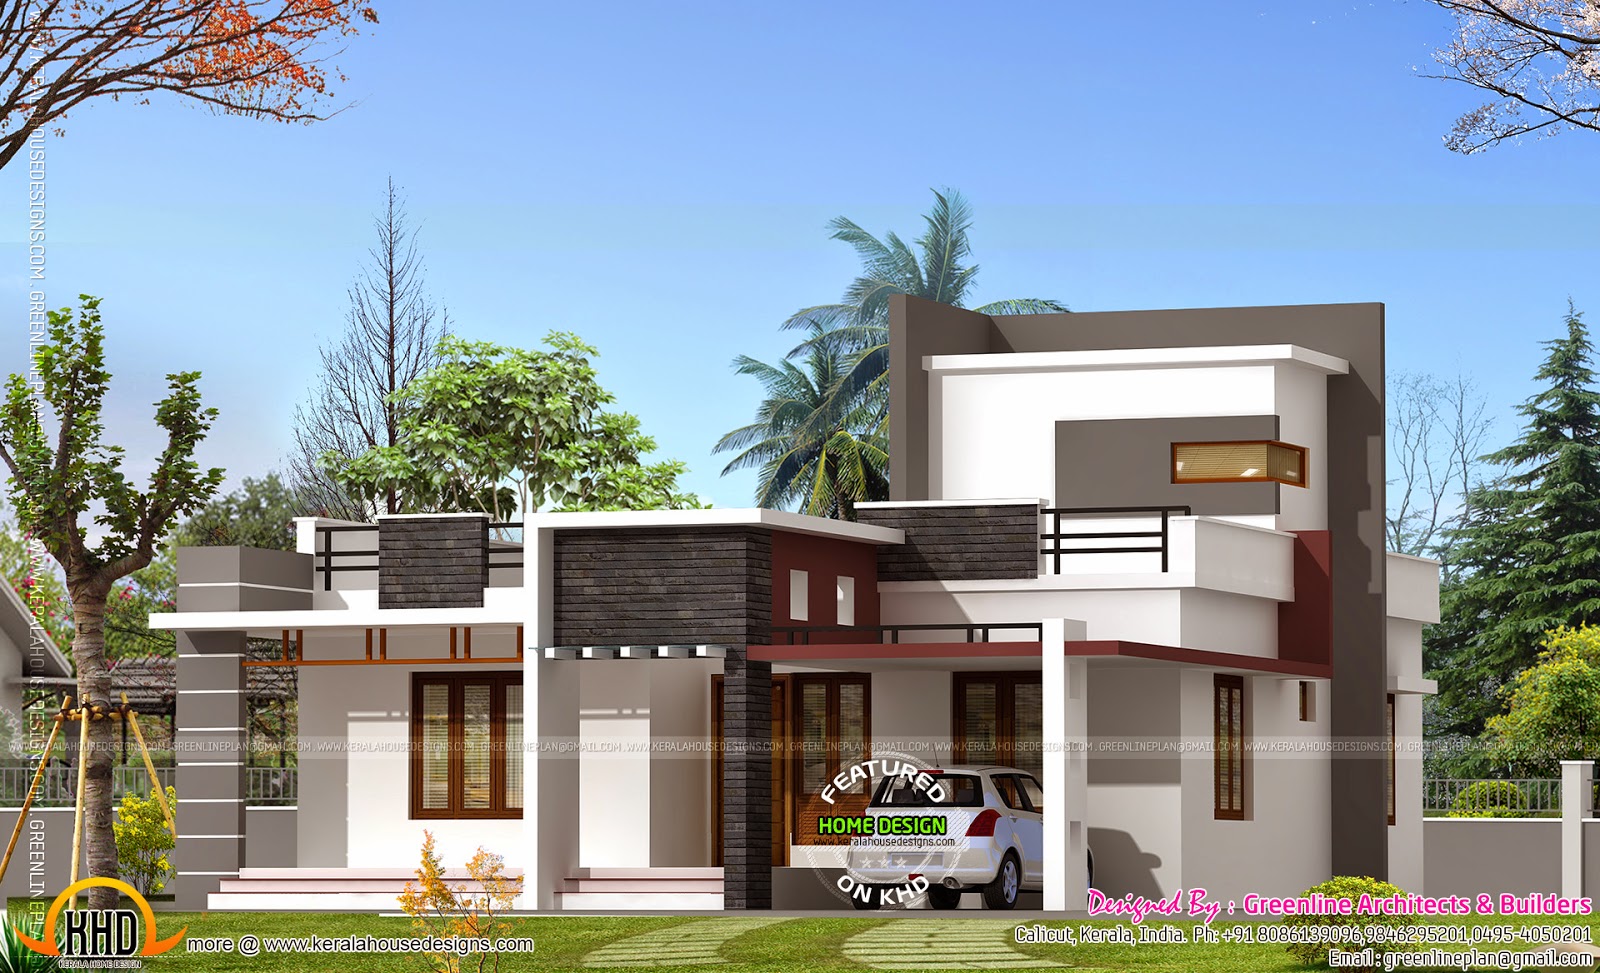  1000  square  feet  house  Kerala home  design and floor plans 